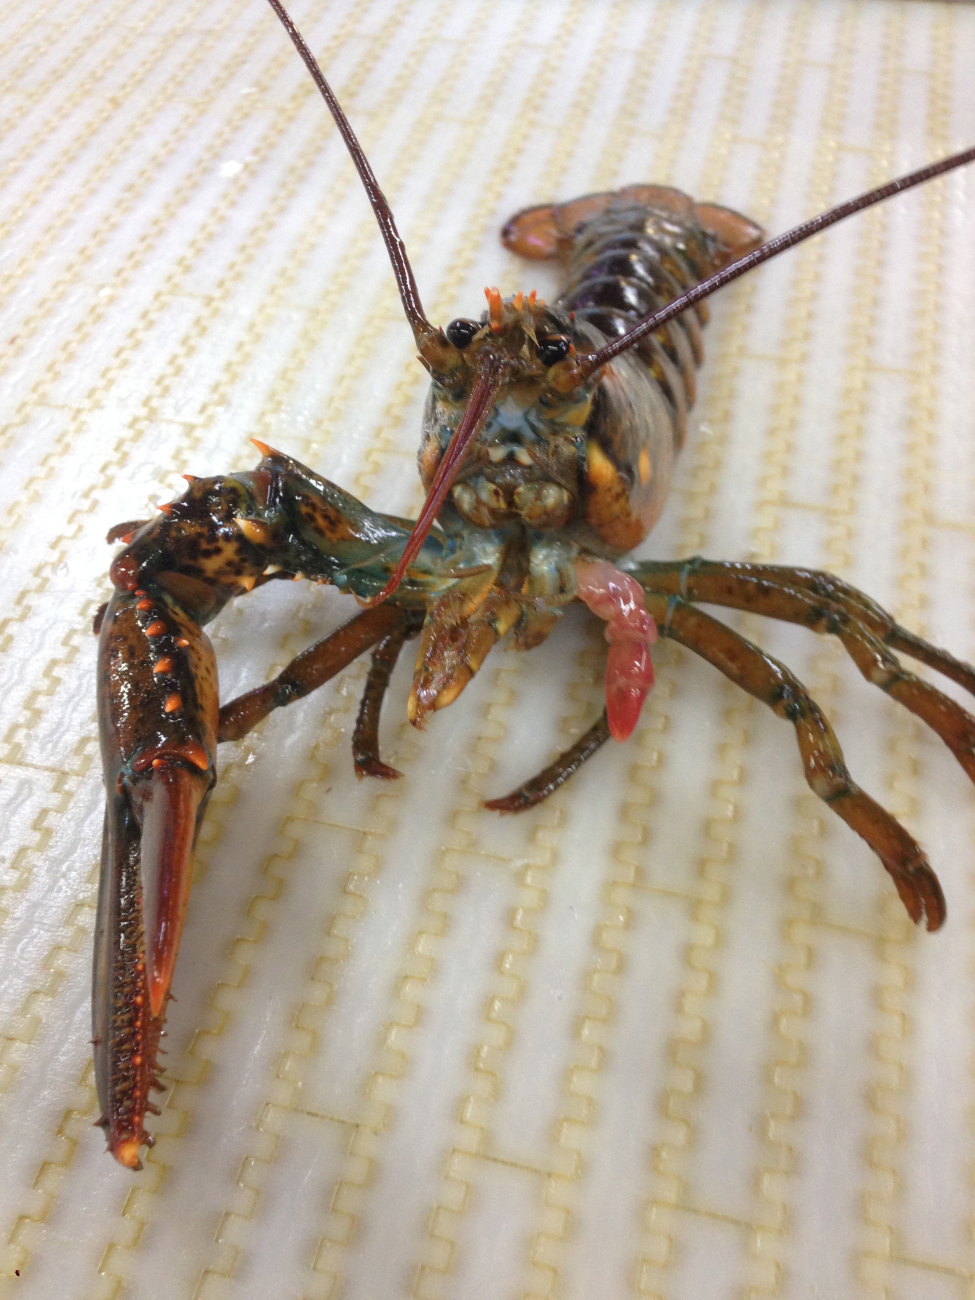 This lobster lost a claw and is in the early stages of regenerating it